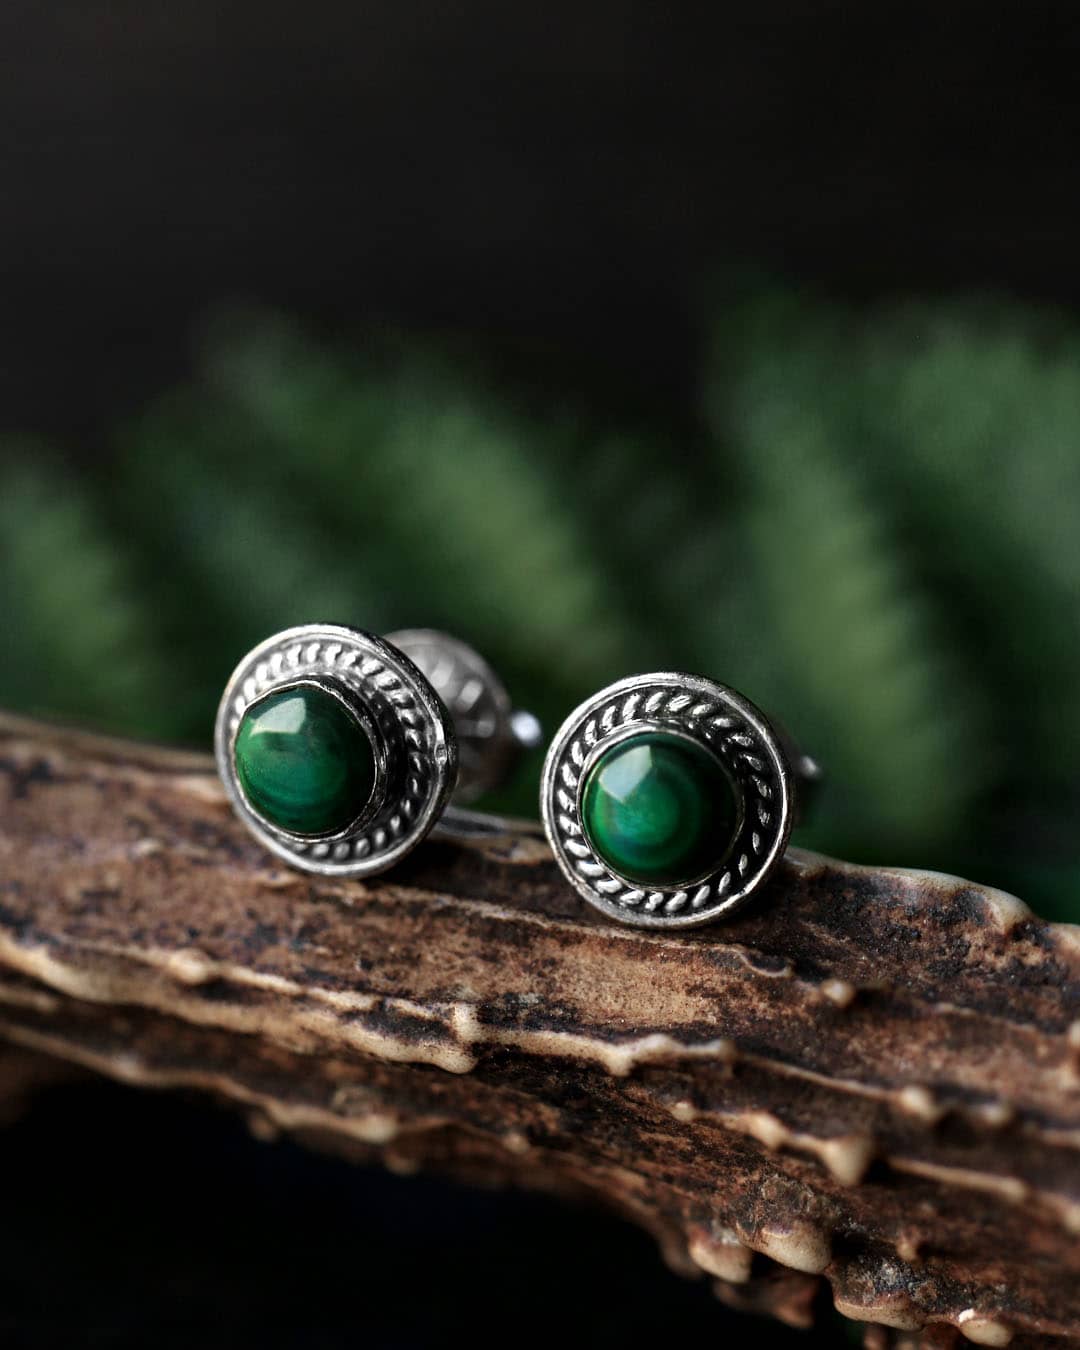 round sterling silver malachite earrings on brown branch with green background